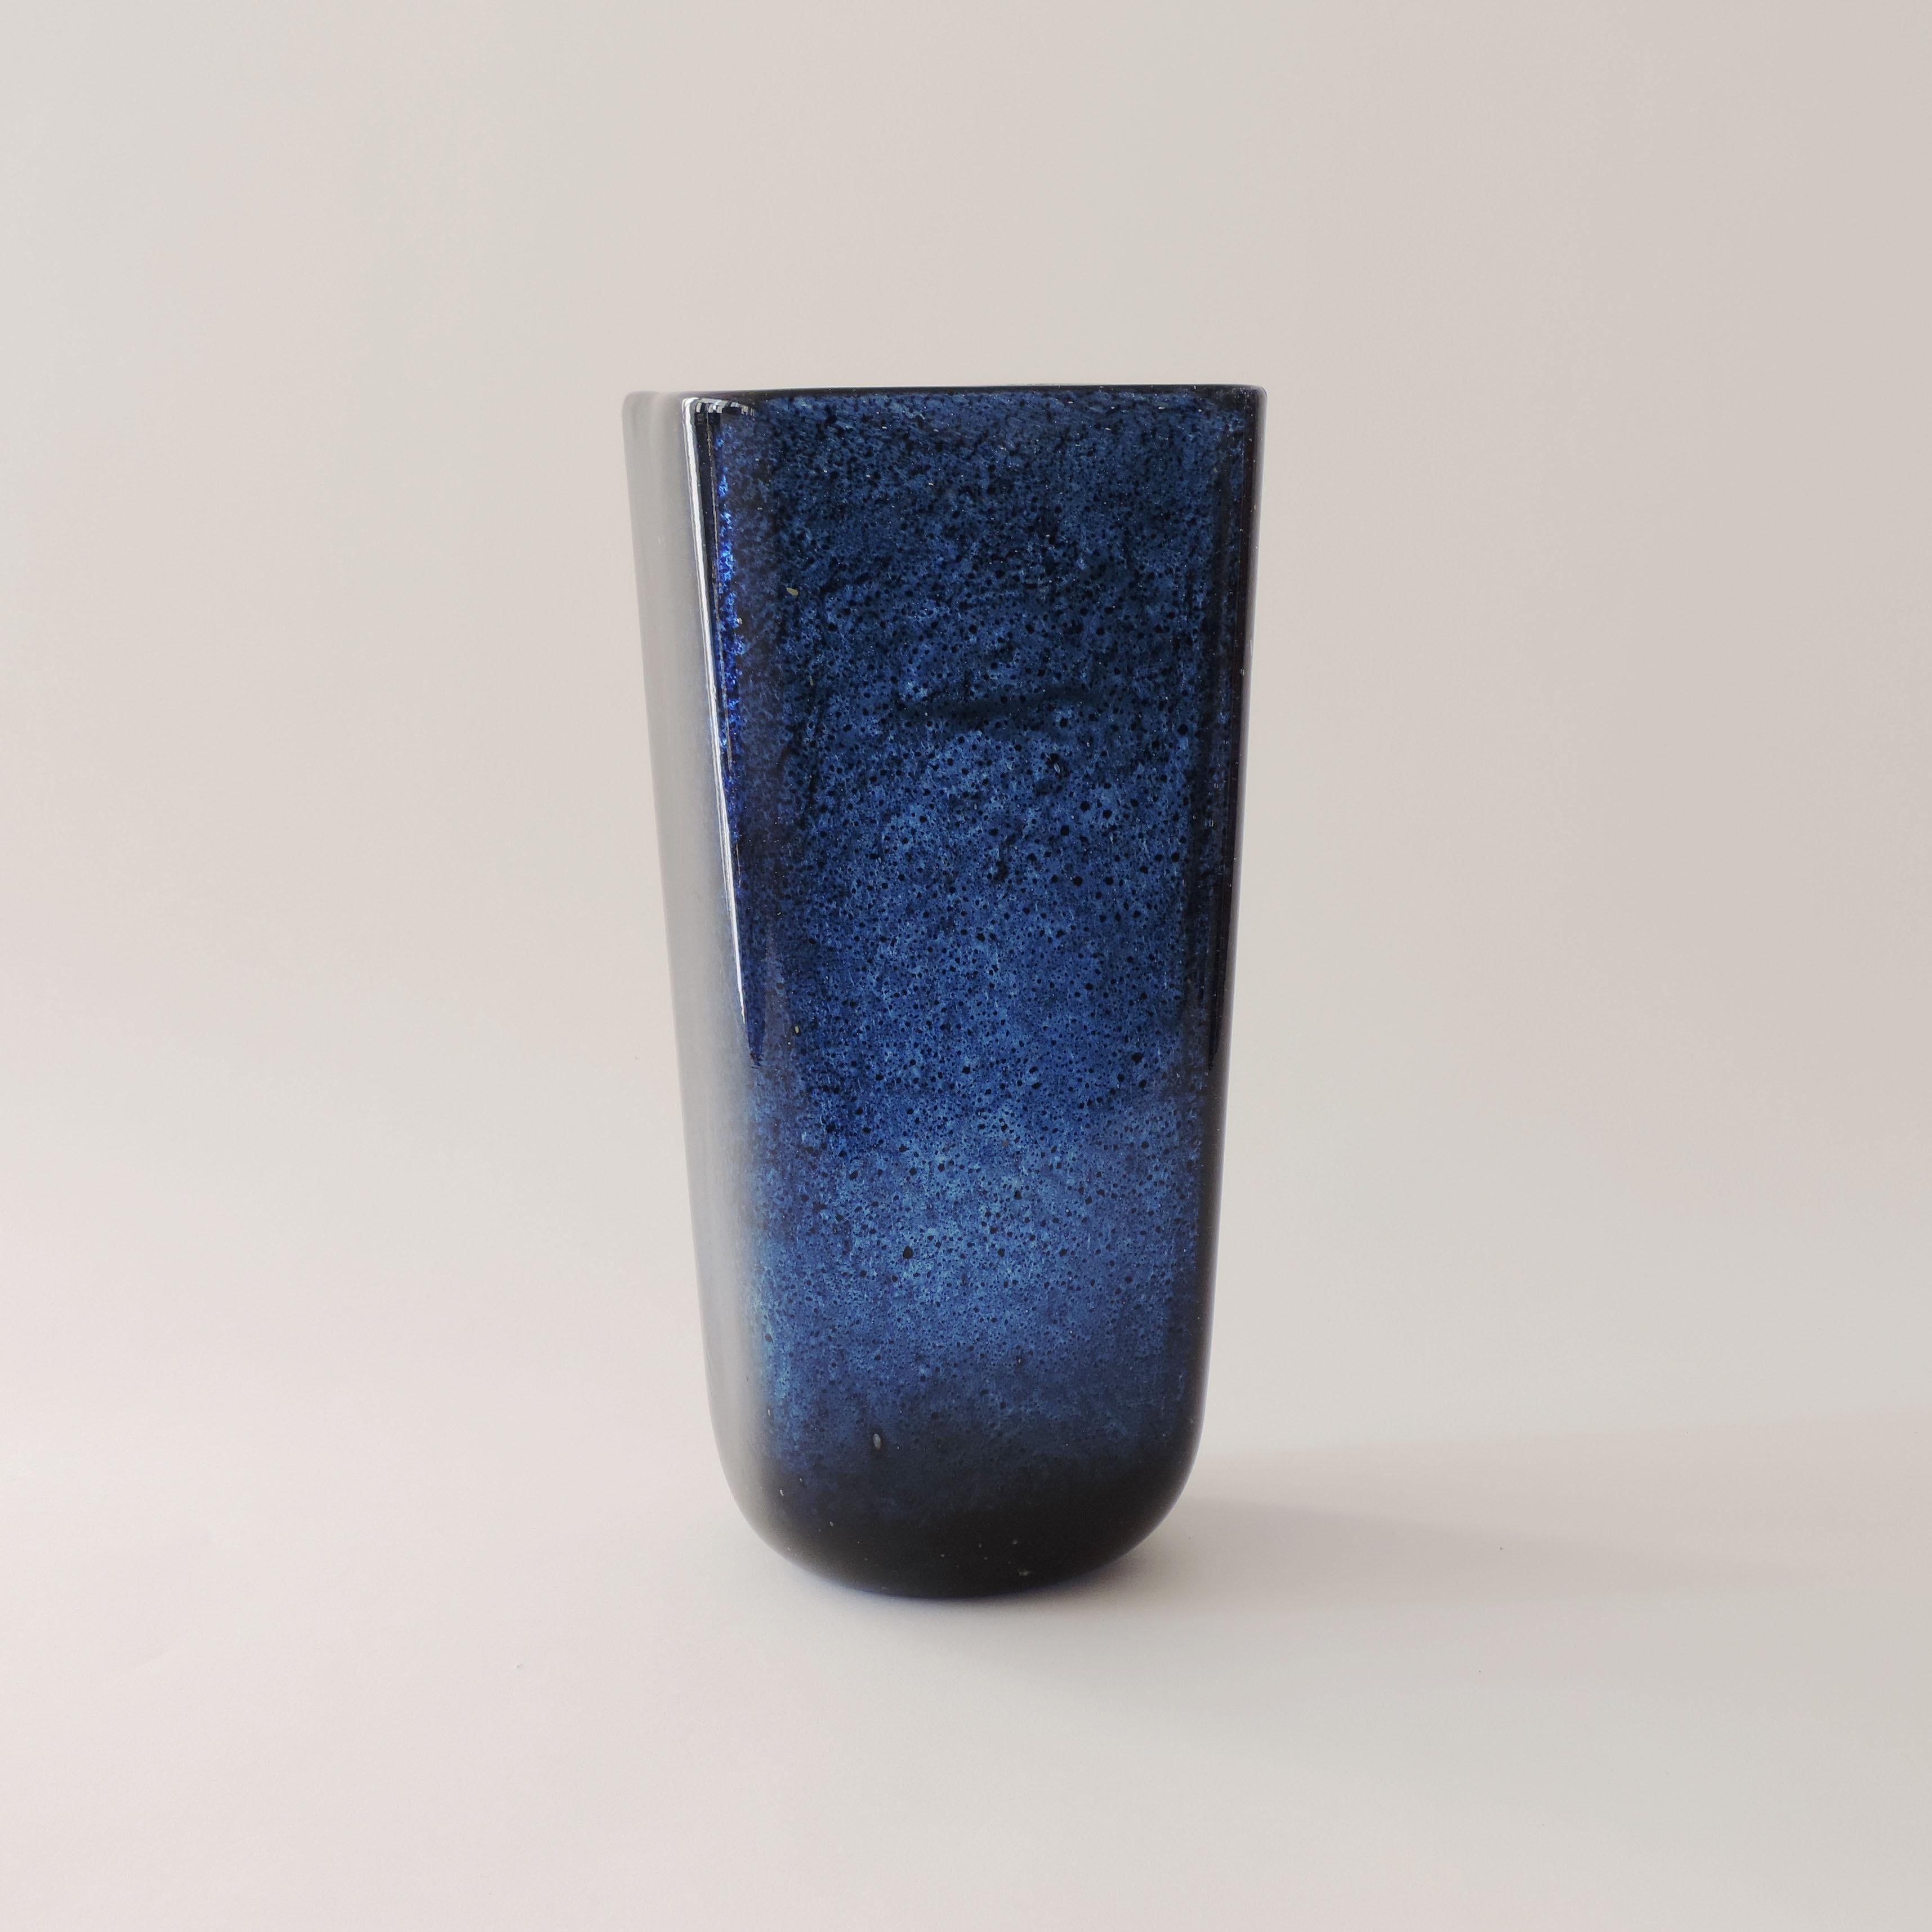 Ercole Barovier 'Marina Gemmata' Vase for Ferro Toso Barovier, Italy, 1930s In Excellent Condition For Sale In Milan, IT